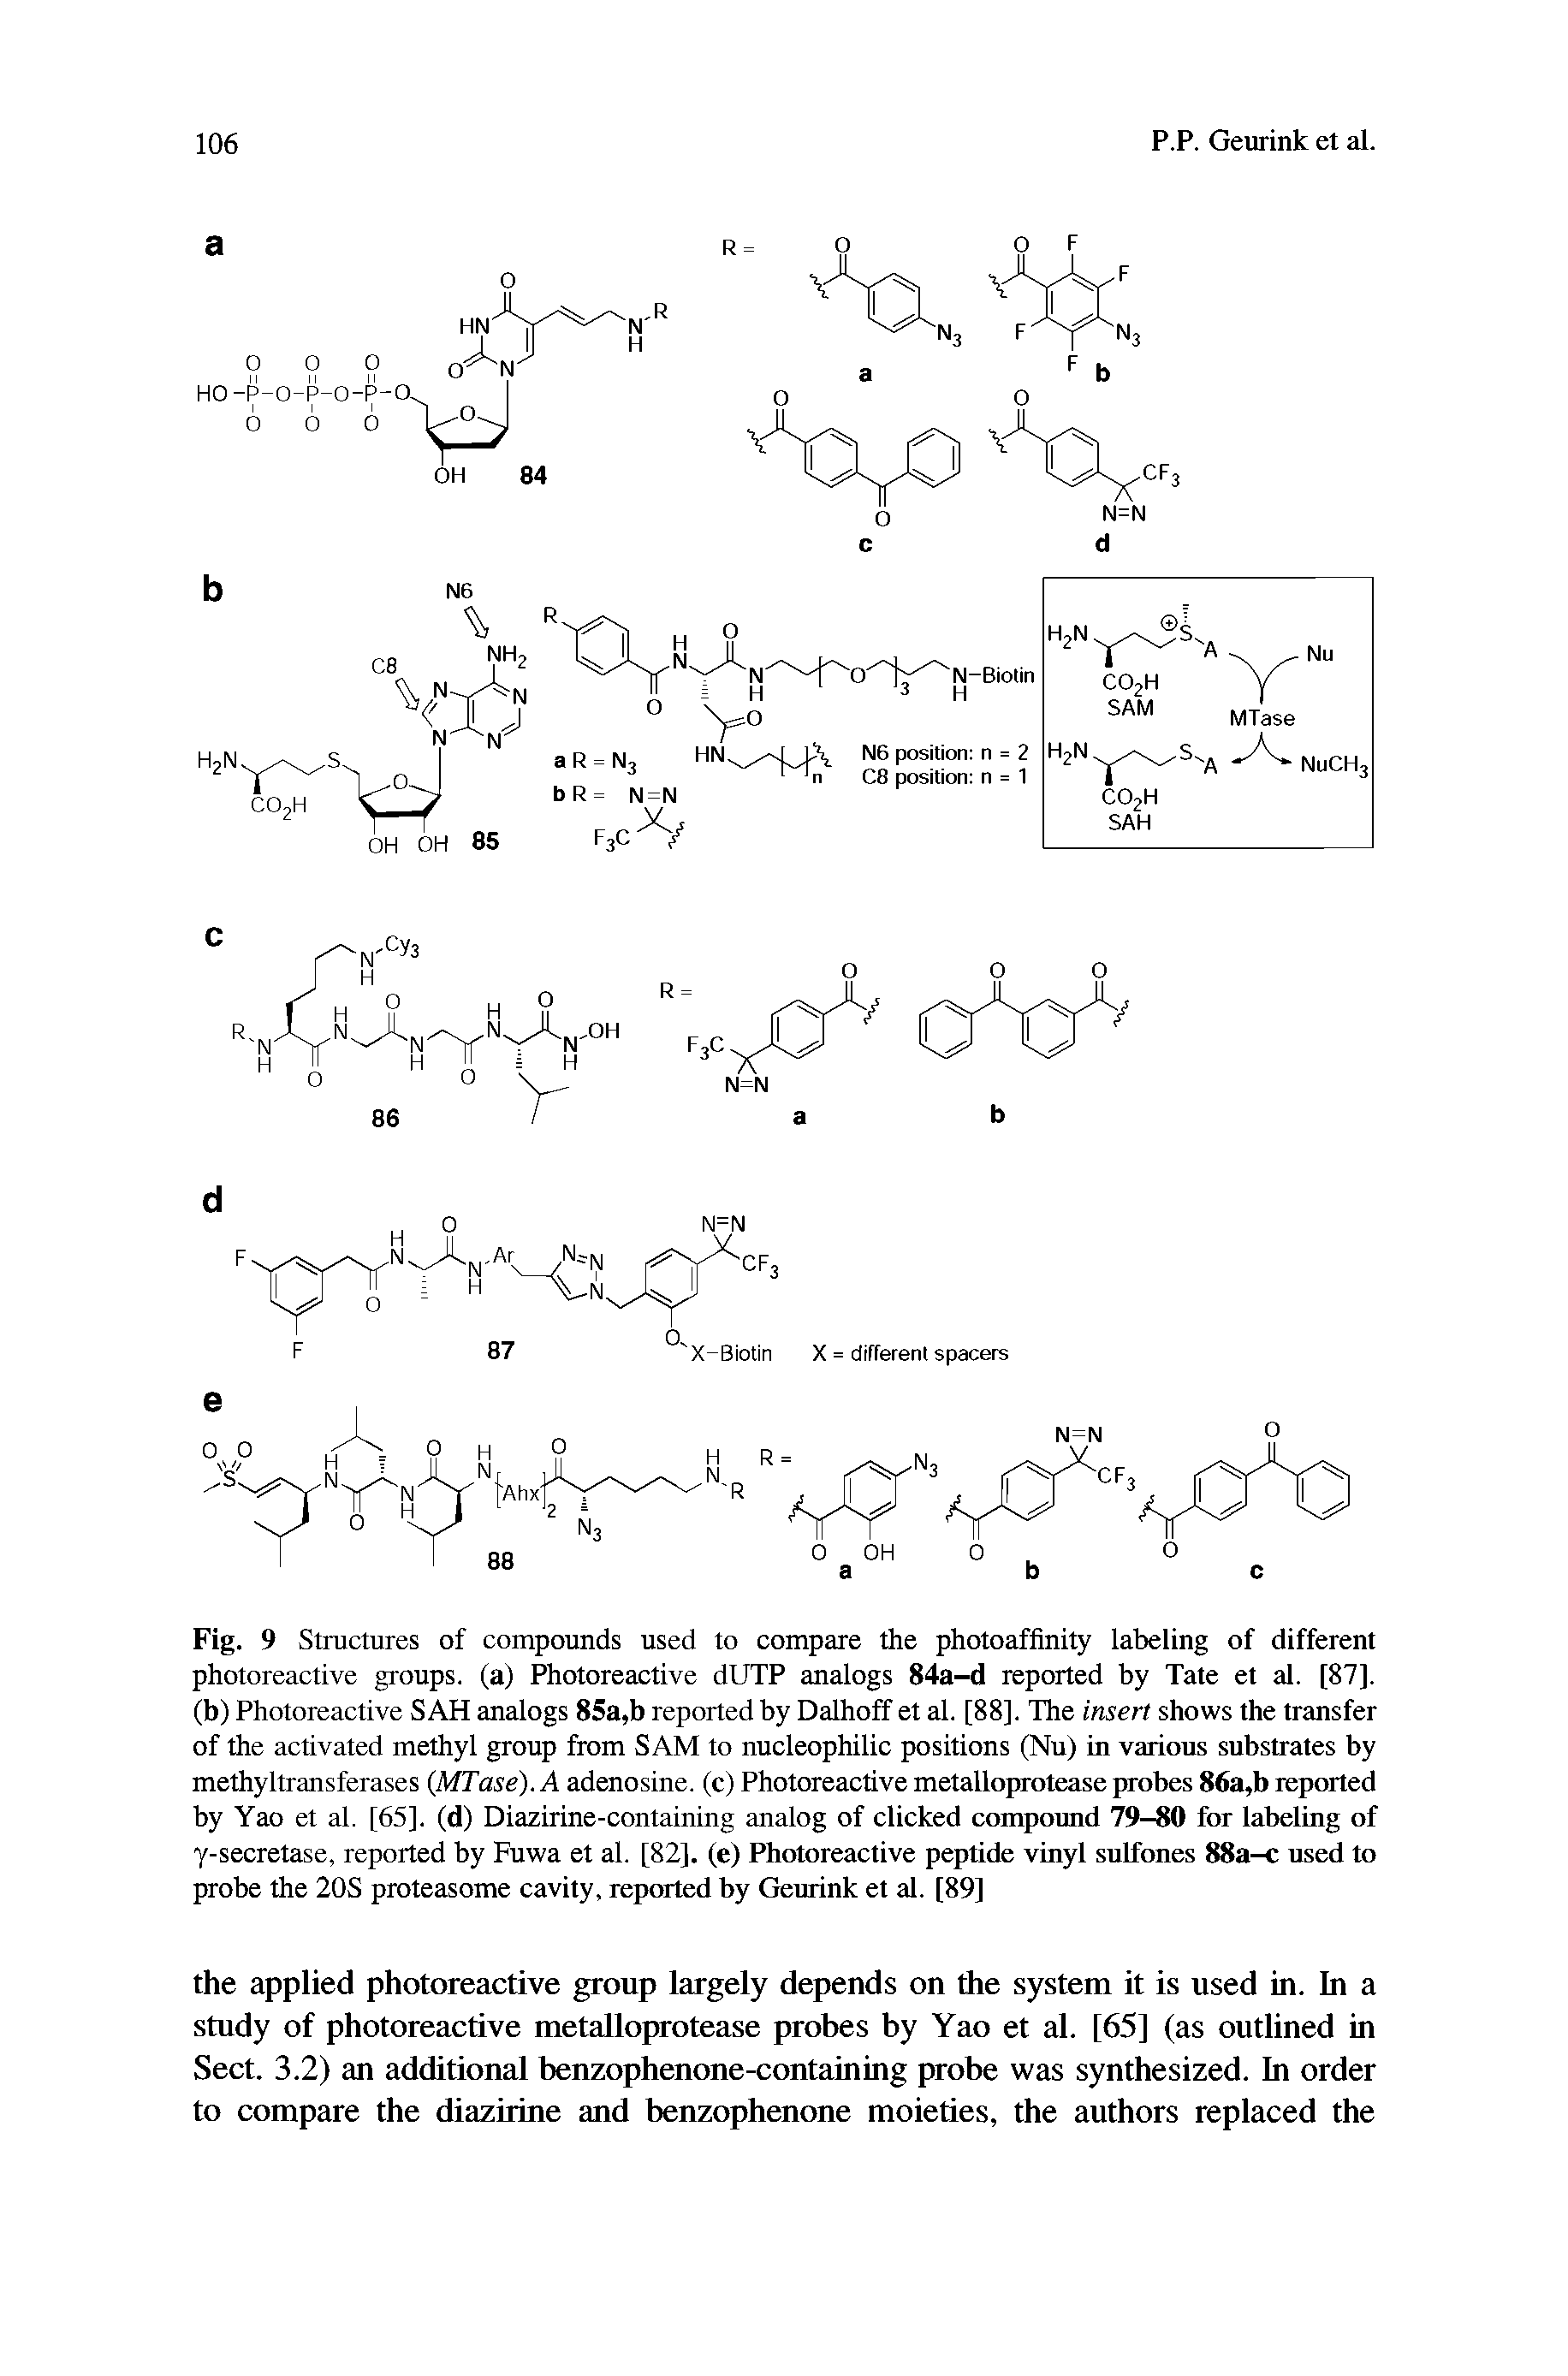 Fig. 9 Structures of compounds used to compare the photoaffinity labeling of different photoreactive groups, (a) Photoreactive dUTP analogs 84a-d reported by Tate et al. [87]. (b) Photoreactive SAH analogs 85a,b reported by Dalhoff et al. [88]. The insert shows the transfer of the activated methyl group from SAM to nucleophilic positions (Nu) in various substrates by methyltransferases (MTase). A adenosine, (c) Photoreactive metalloprotease probes 86a,b reported by Yao et al. [65]. (d) Diazirine-containing analog of clicked compound 79-80 for labeling of y-secretase, reported by Fuwa et al. [82], (e) Photoreactive peptide vinyl sulfones 88a-c used to probe the 20S proteasome cavity, reported by Geurink et al. [89]...